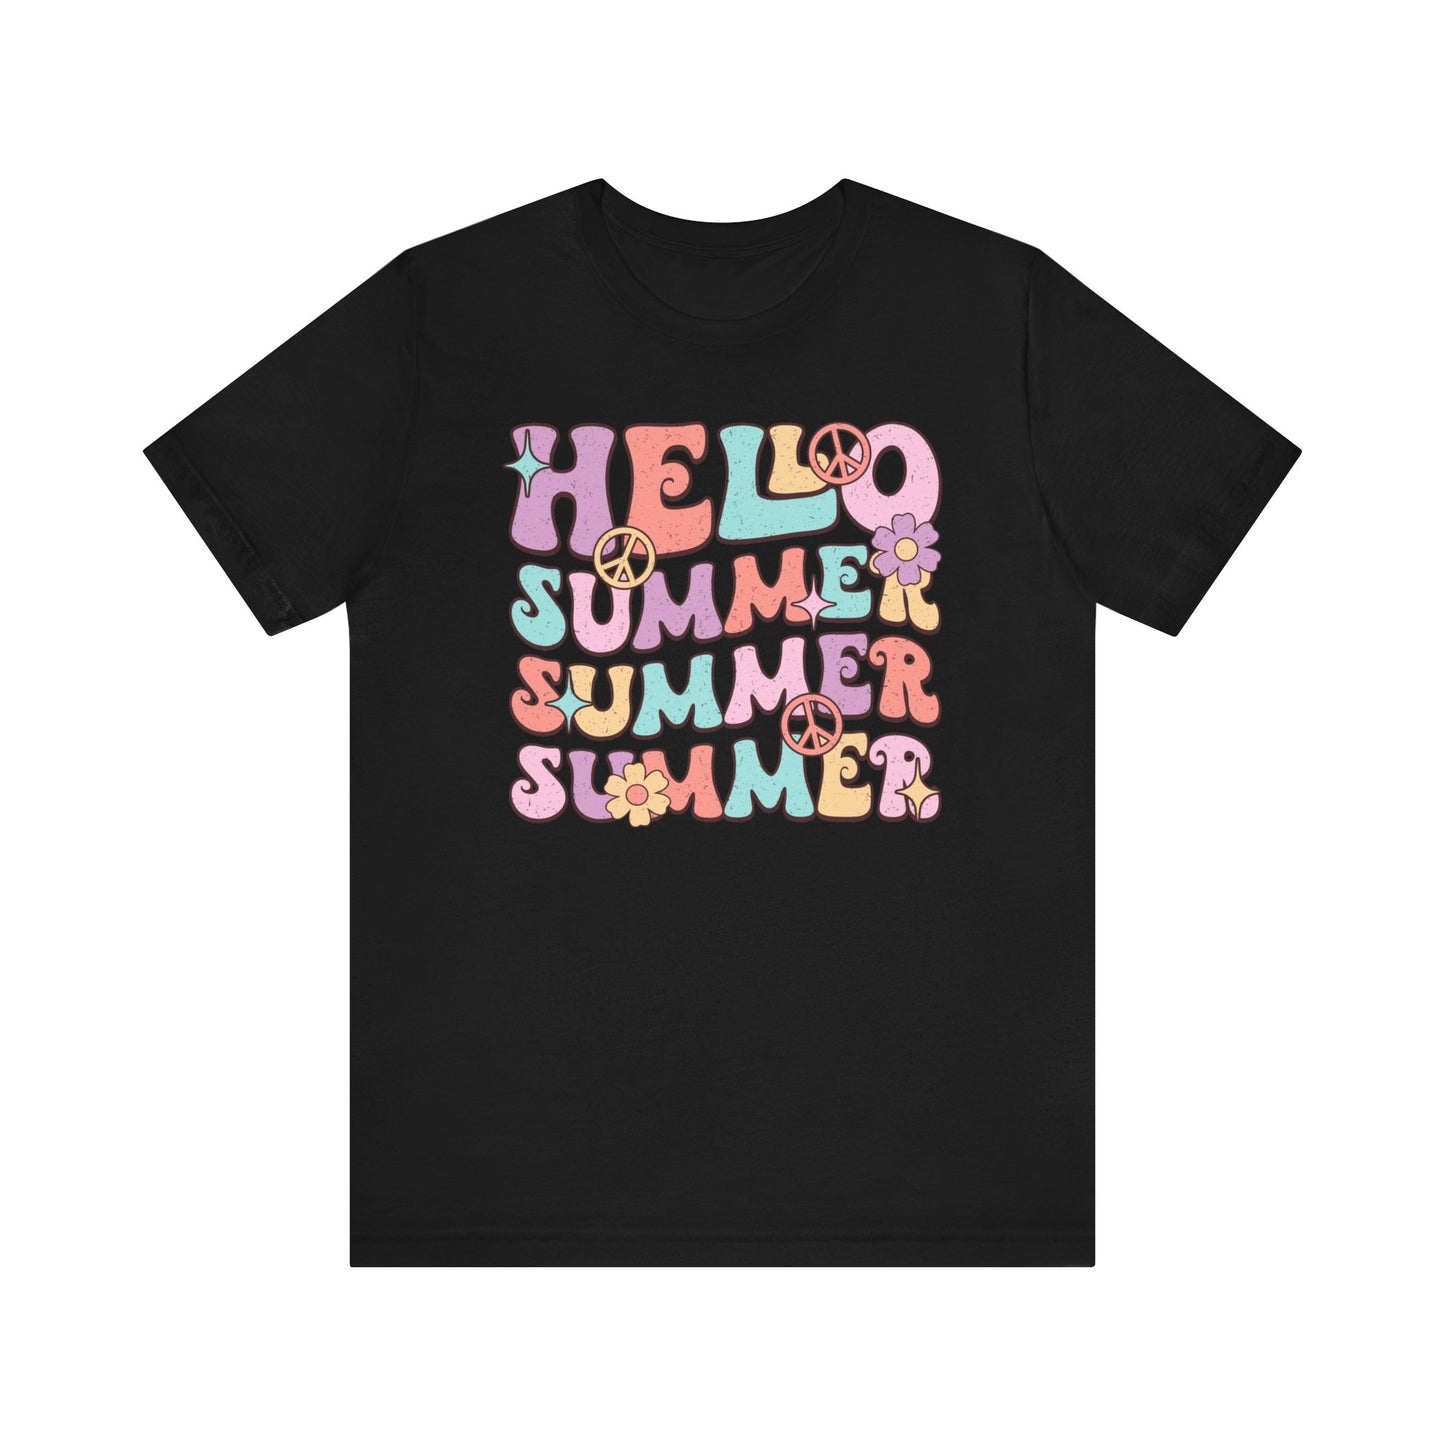 Hello Summer T-Shirt with Retro Hippie Design, Colorful Vintage Style Tee, Unisex Casual Fashion Top